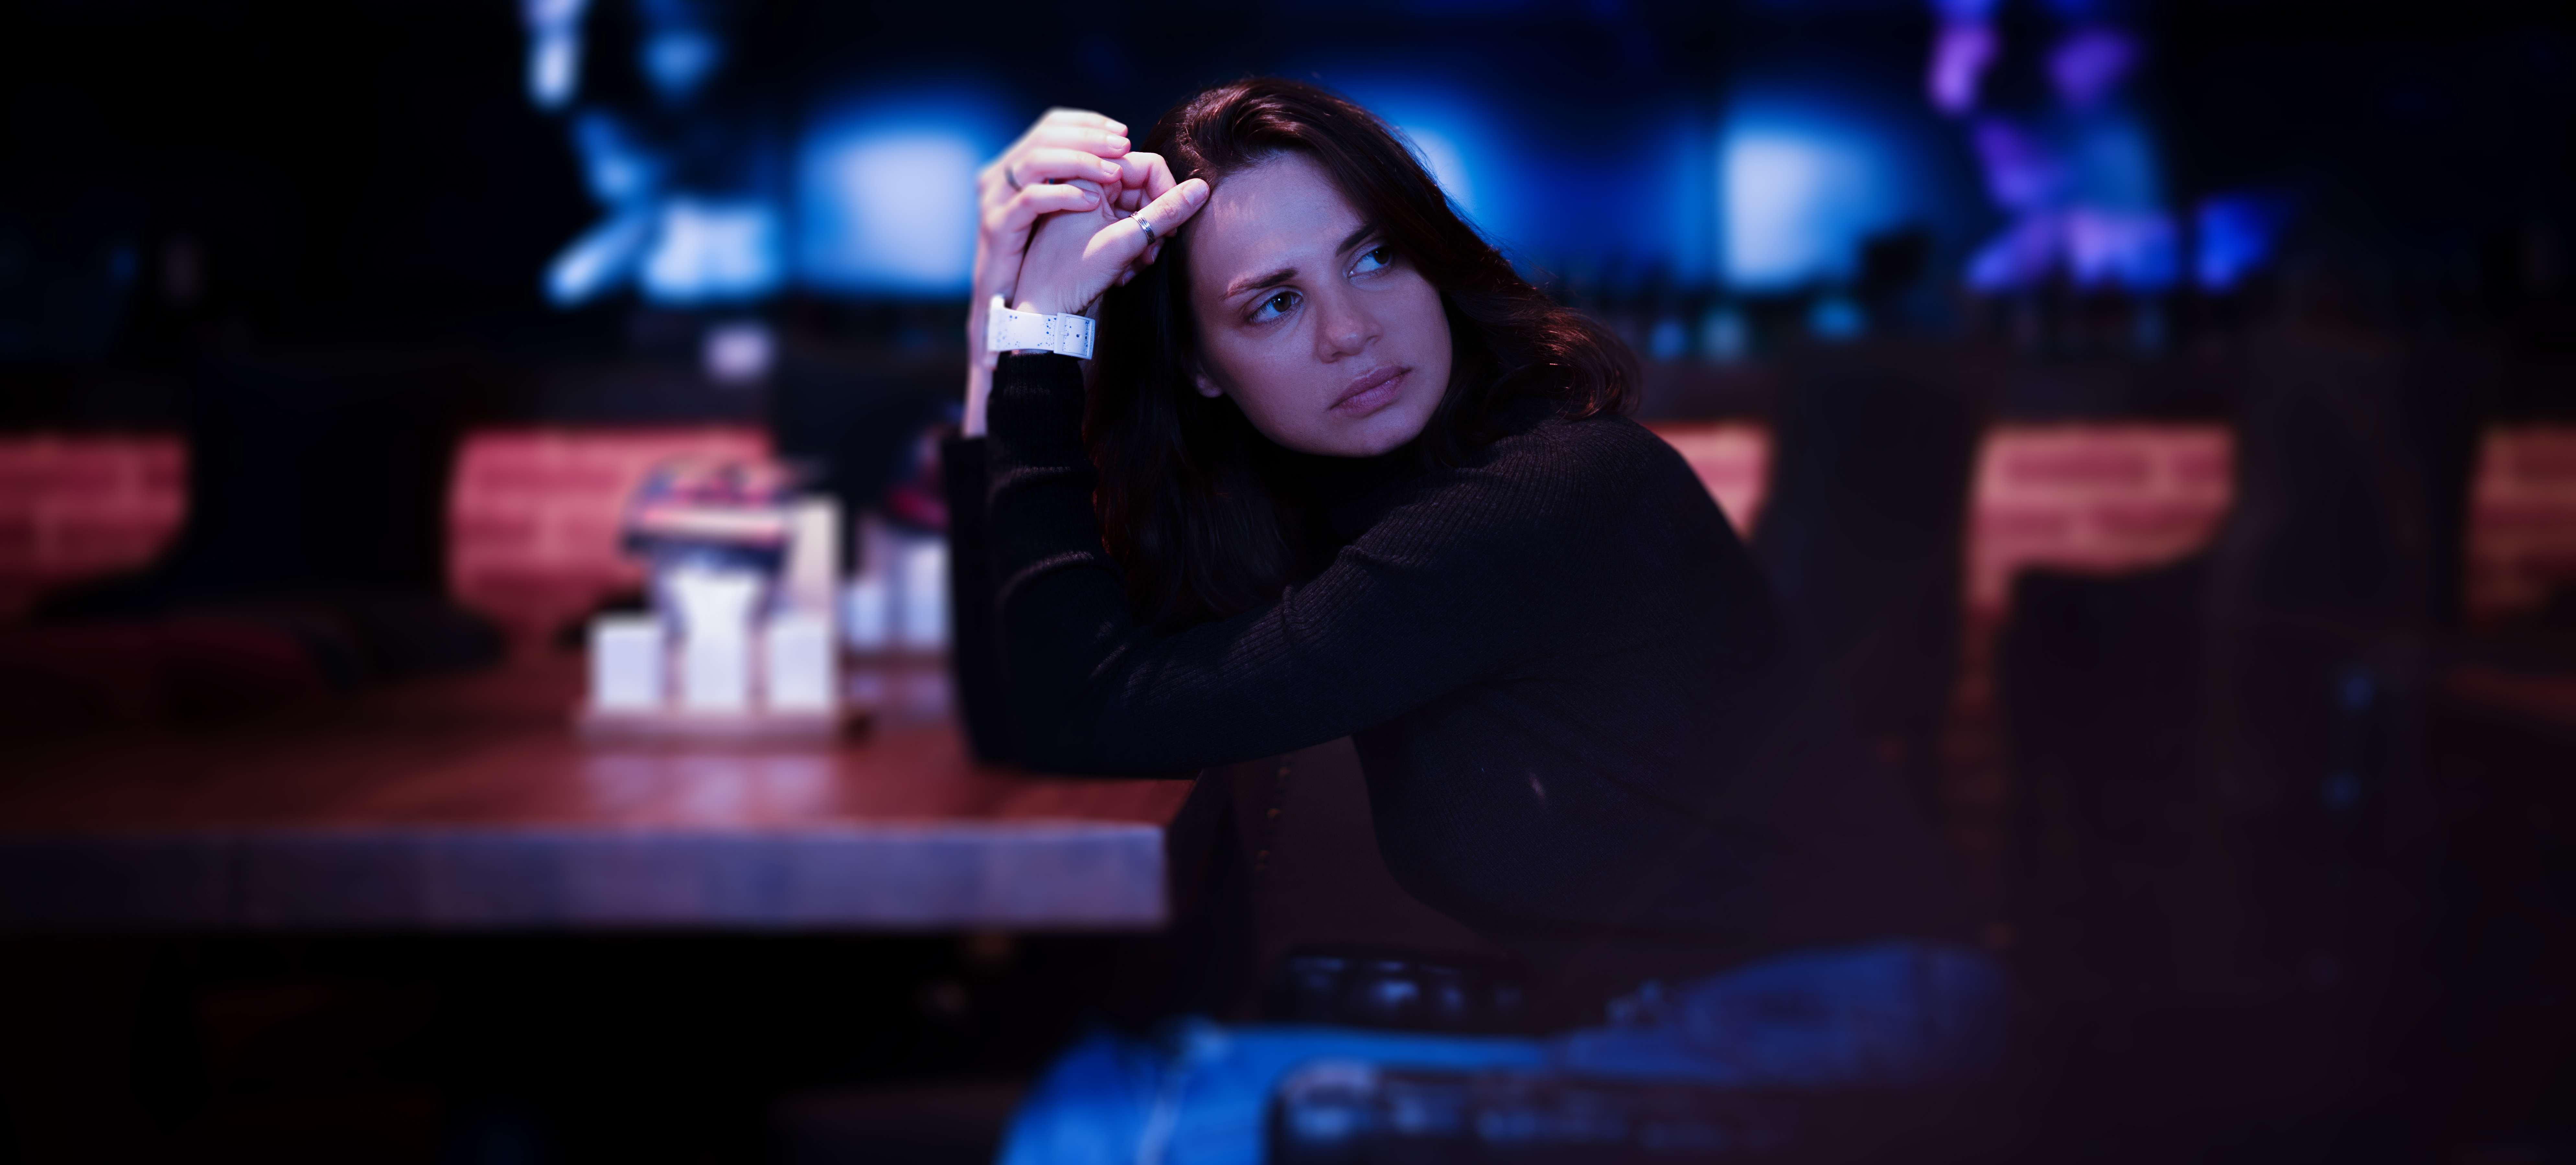 Sad serious young woman sitting in a night restaurant alone. | Source: Shutterstock